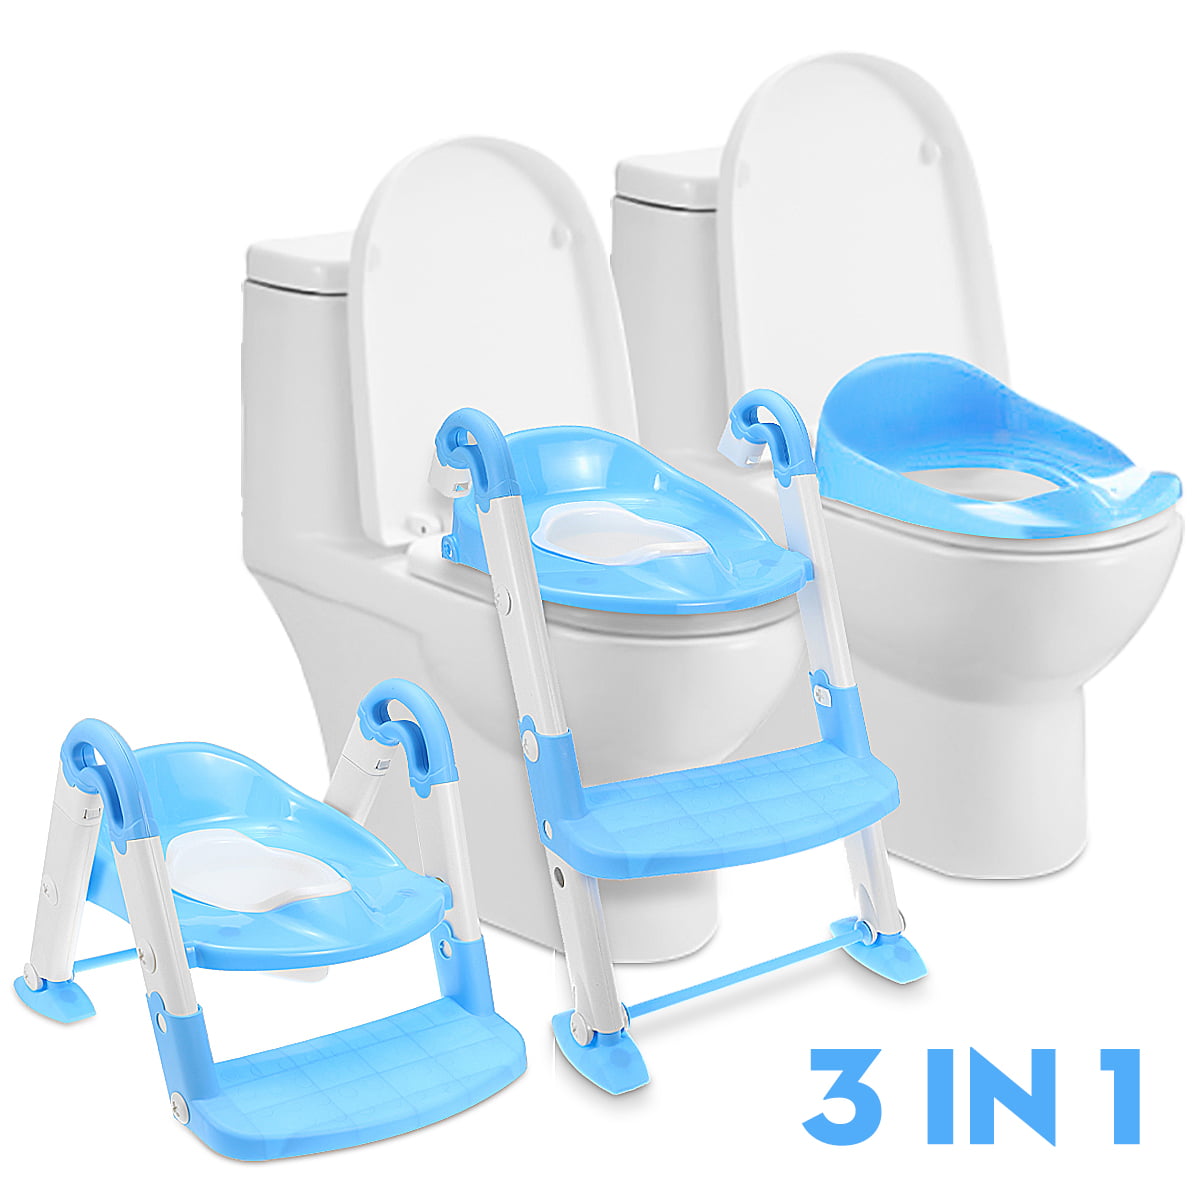 MOGOI Potty Training Toilet Seat with Step Stool Ladder Adjustable Baby Toilet Potty Trainer Chair with Soft Padded Foldable Sturdy Non-Slip Wide Step Stool for Boy Girl Kids Toddler Blue 